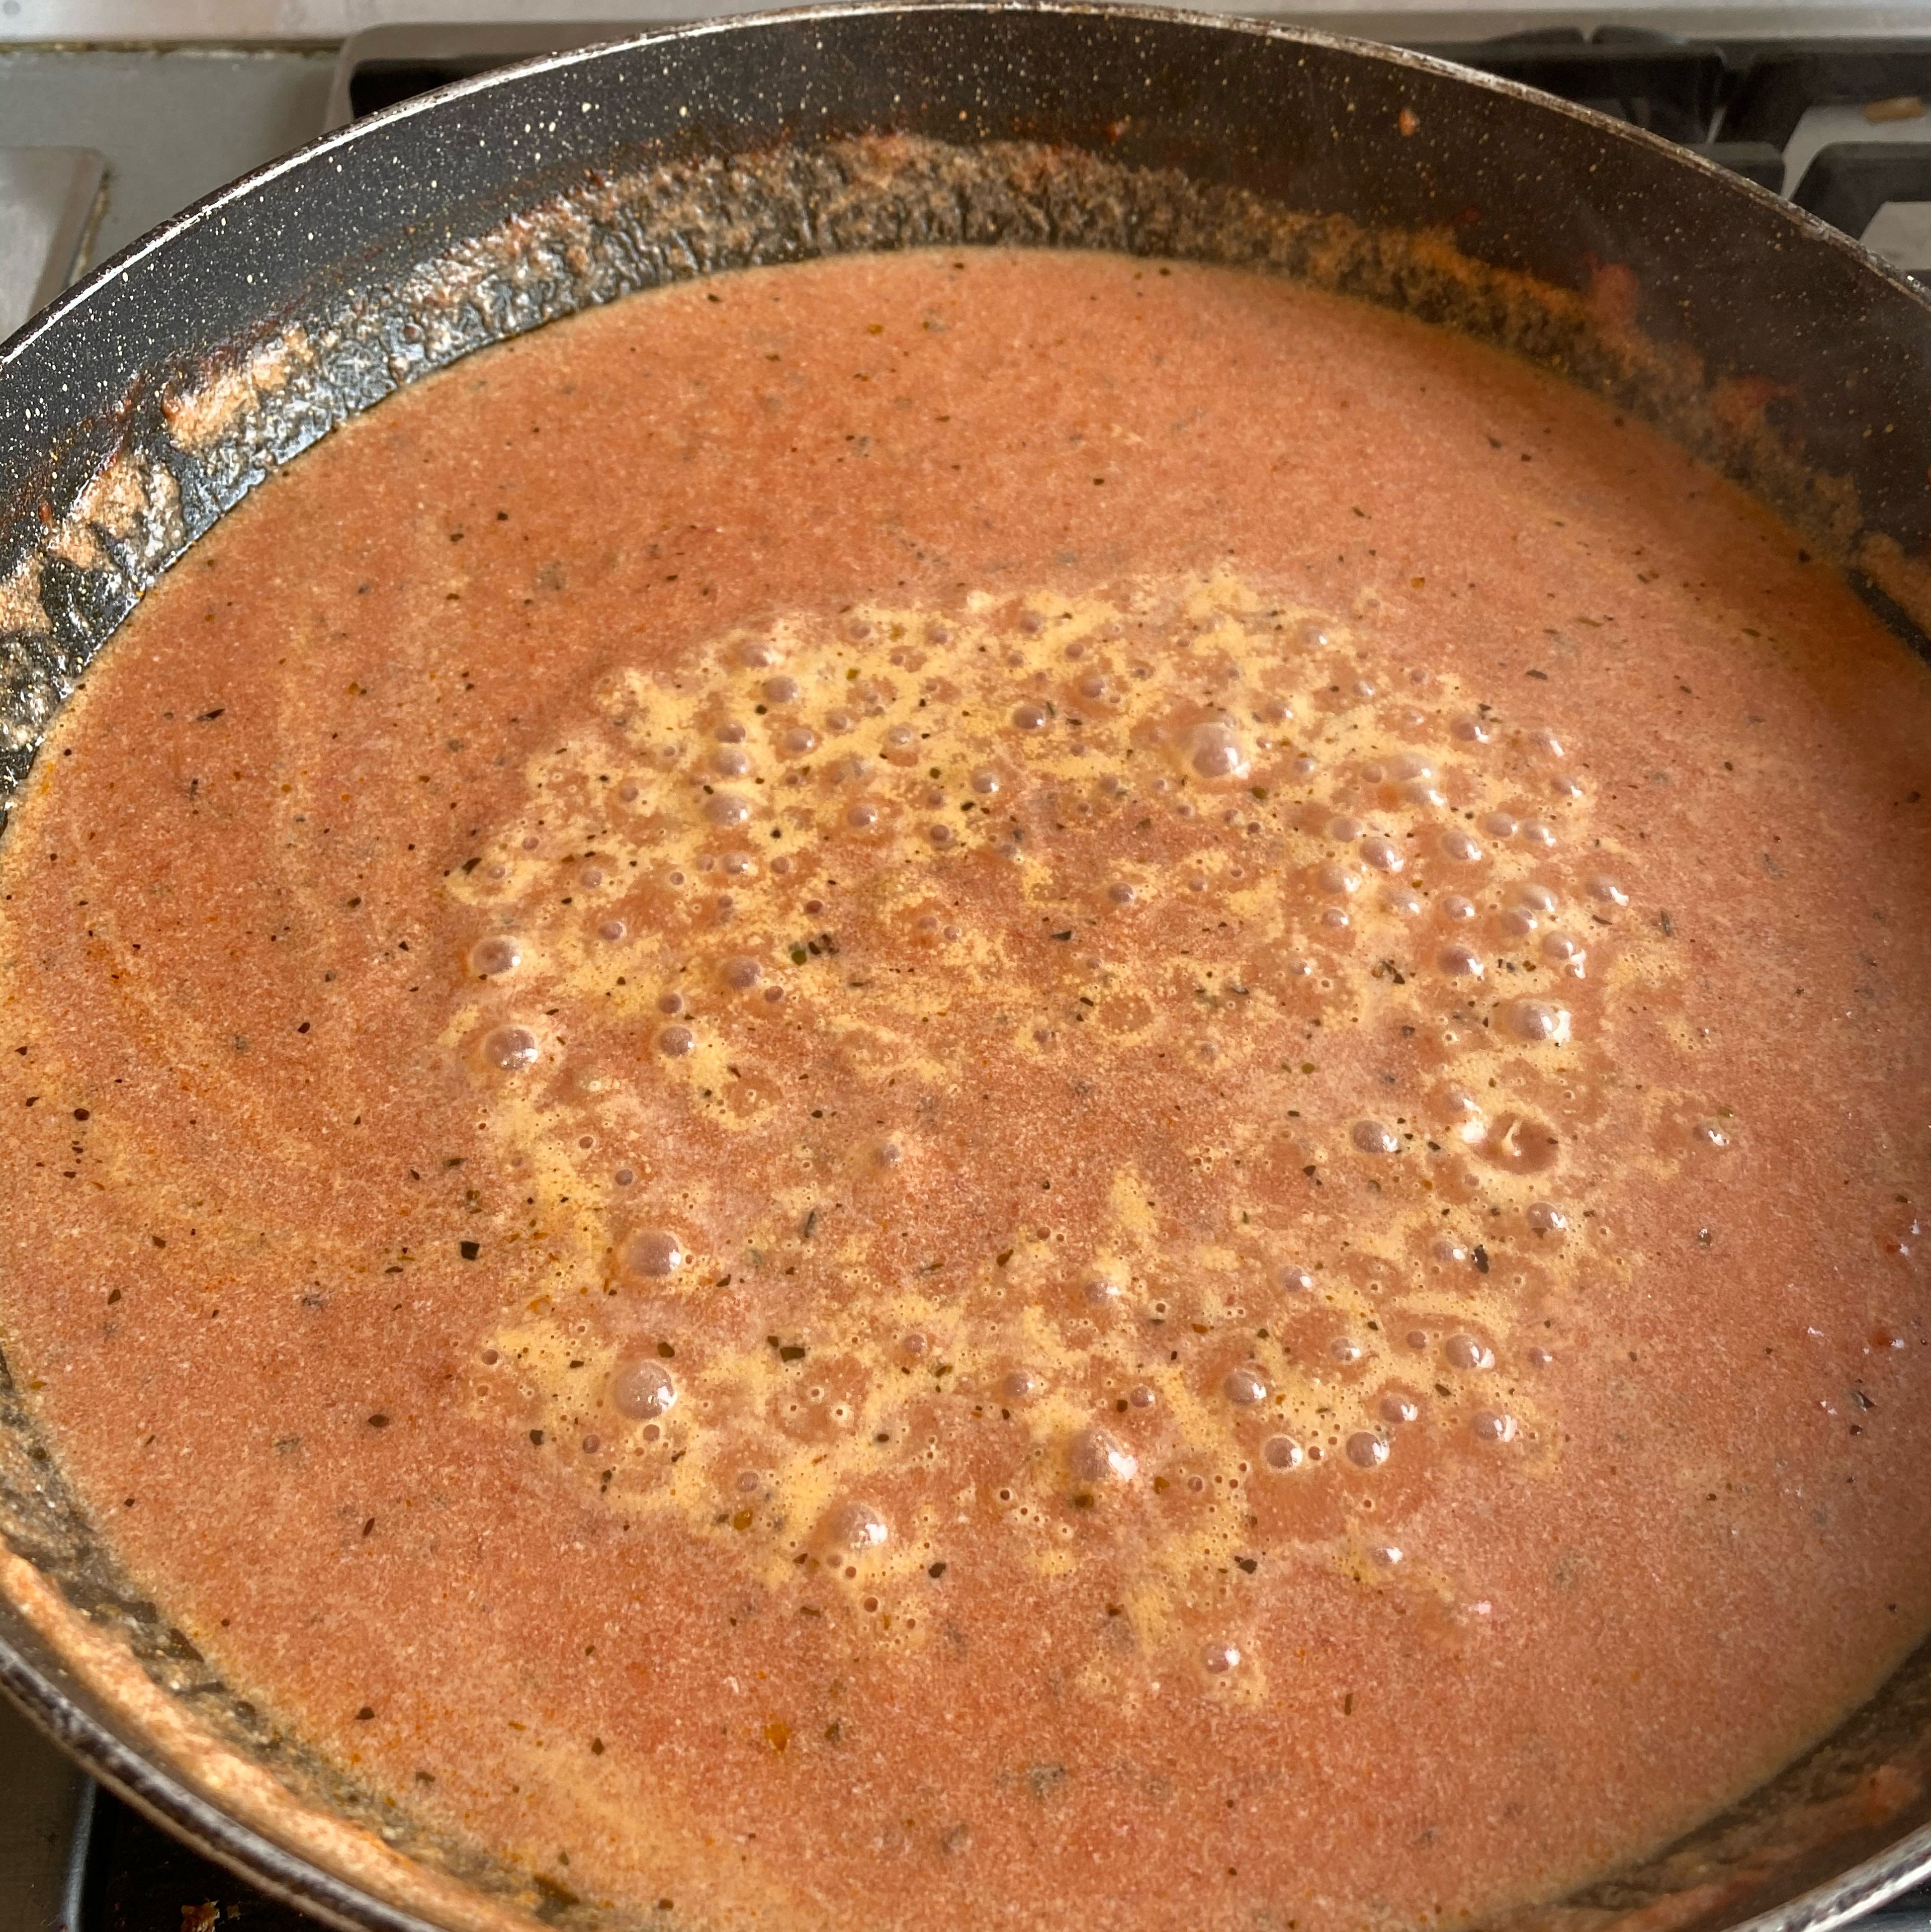 Bring the sauce to a boil on low heat.